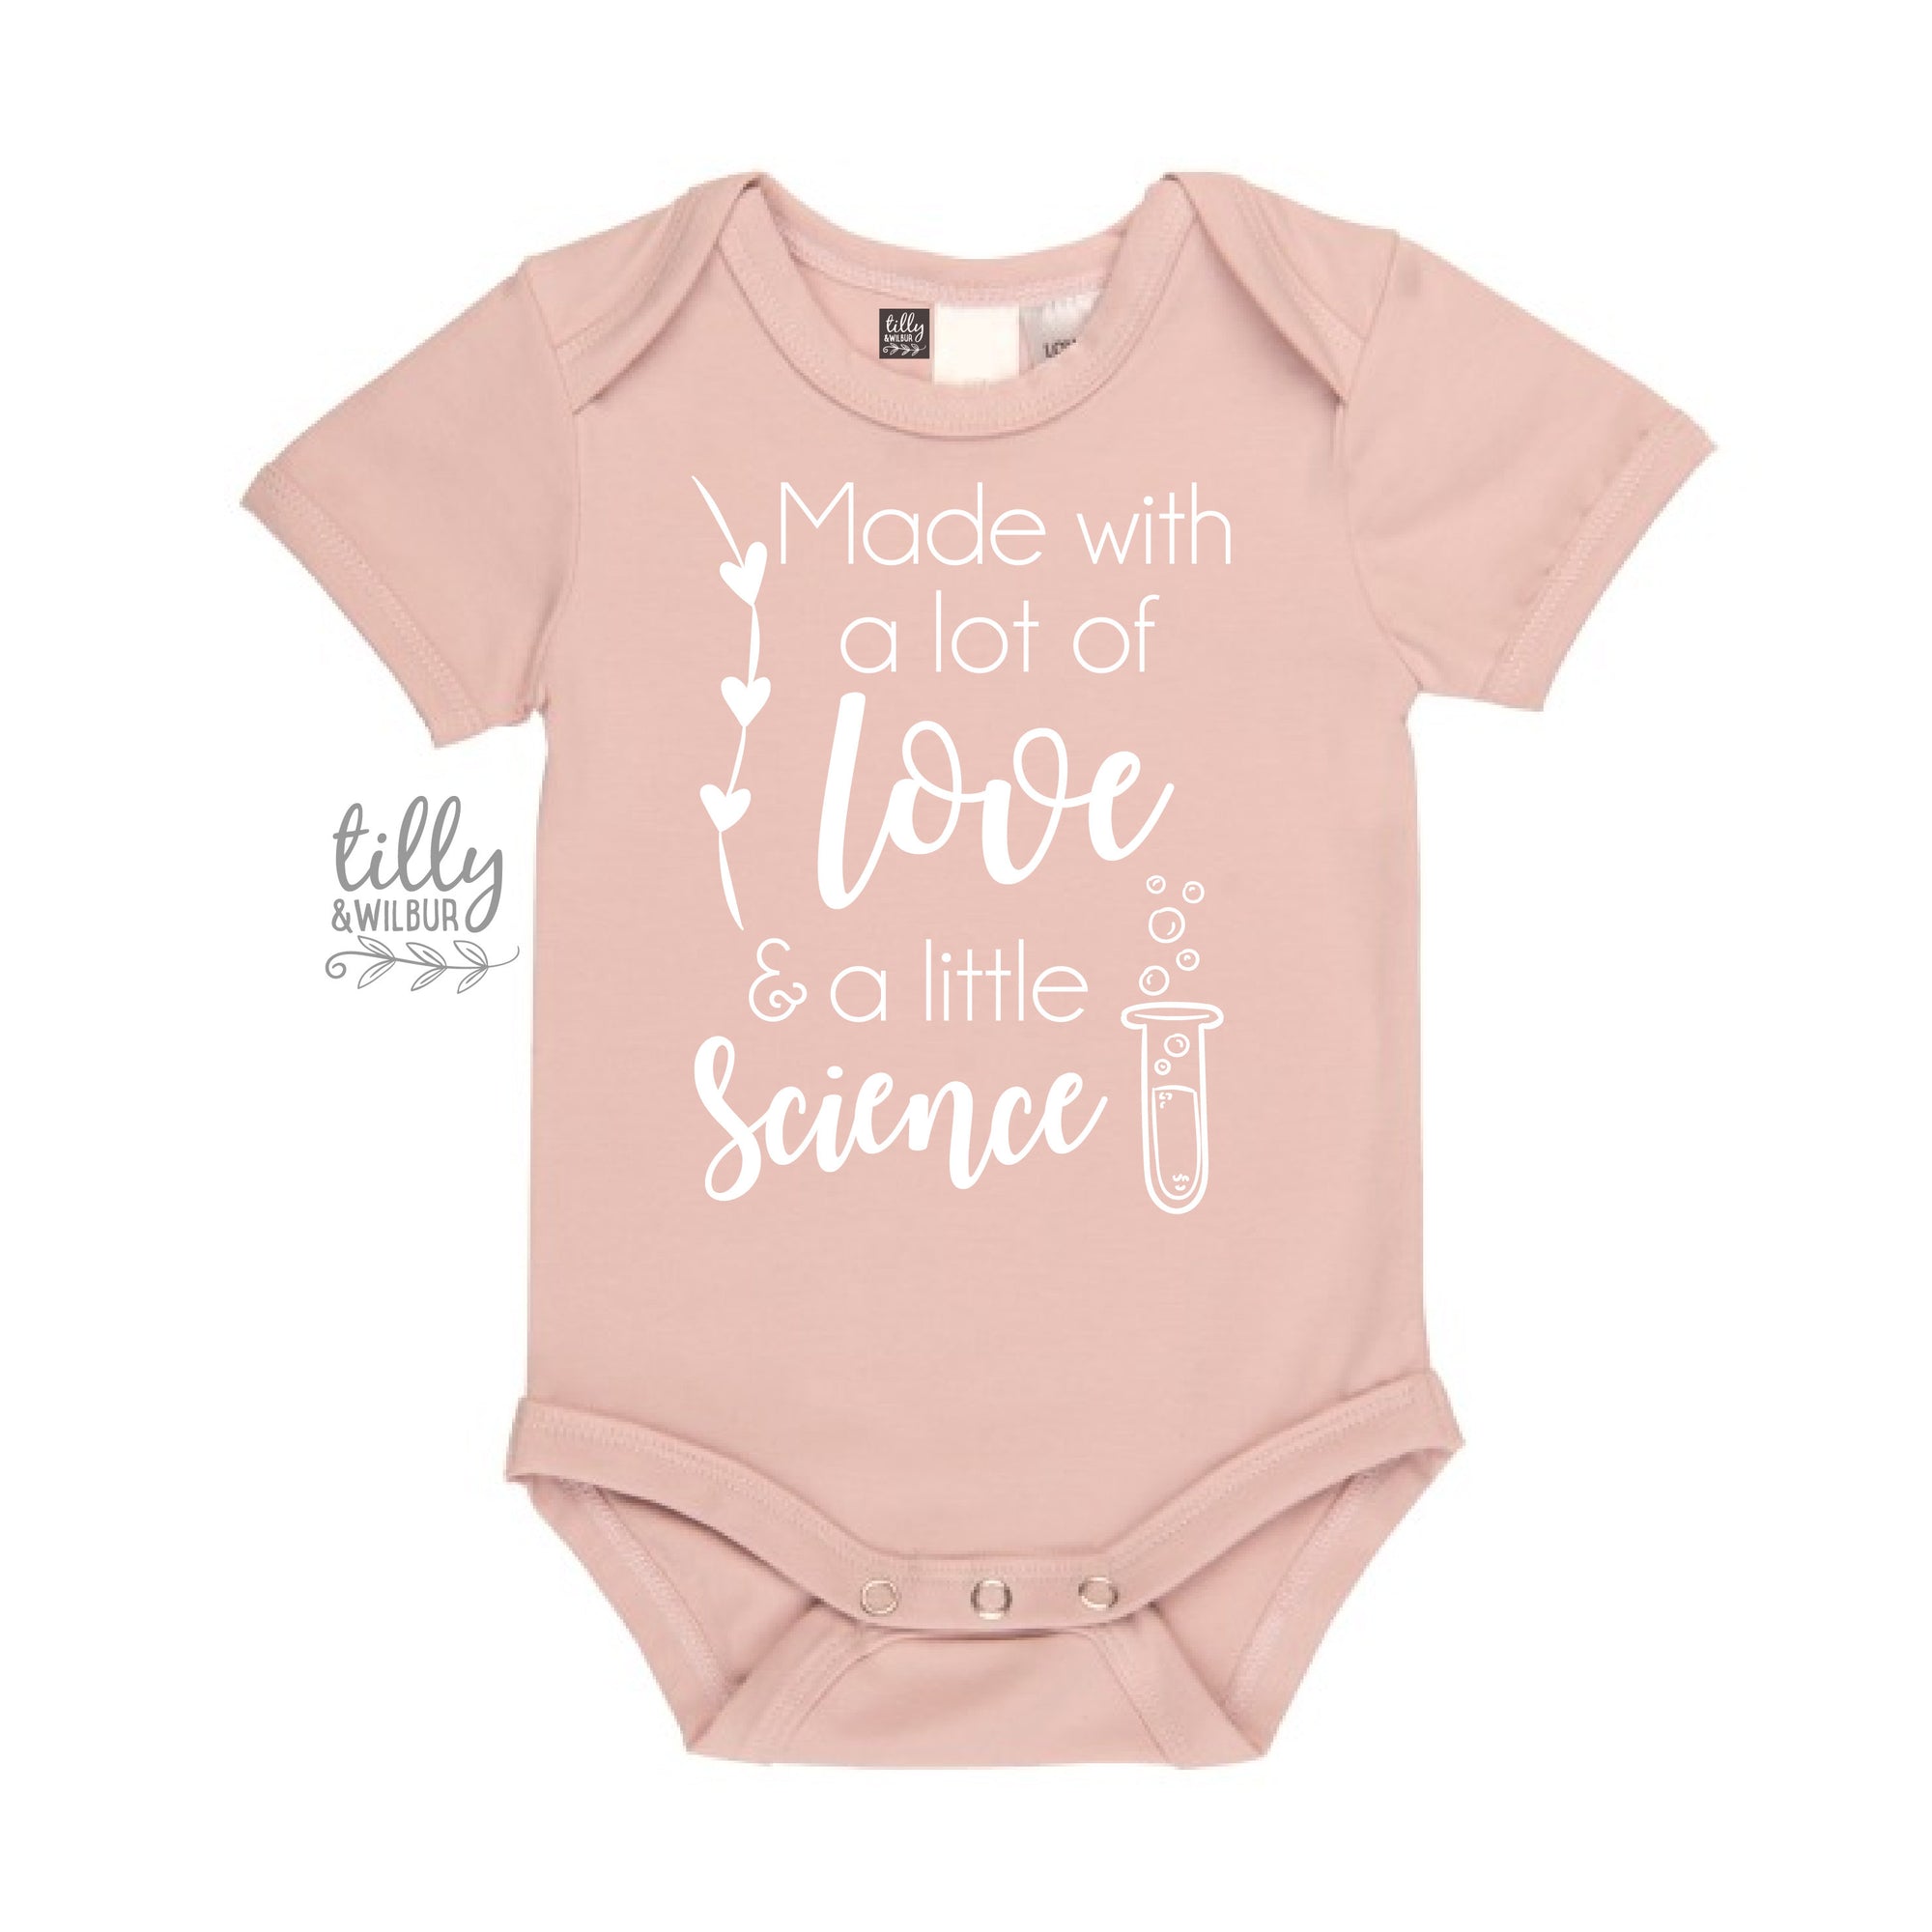 Made With A Lot Of Love And A Little Science Baby Bodysuit, Pregnancy Announcement, IVF Baby, We&#39;re Having A Baby, Worth The Wait, Newborn